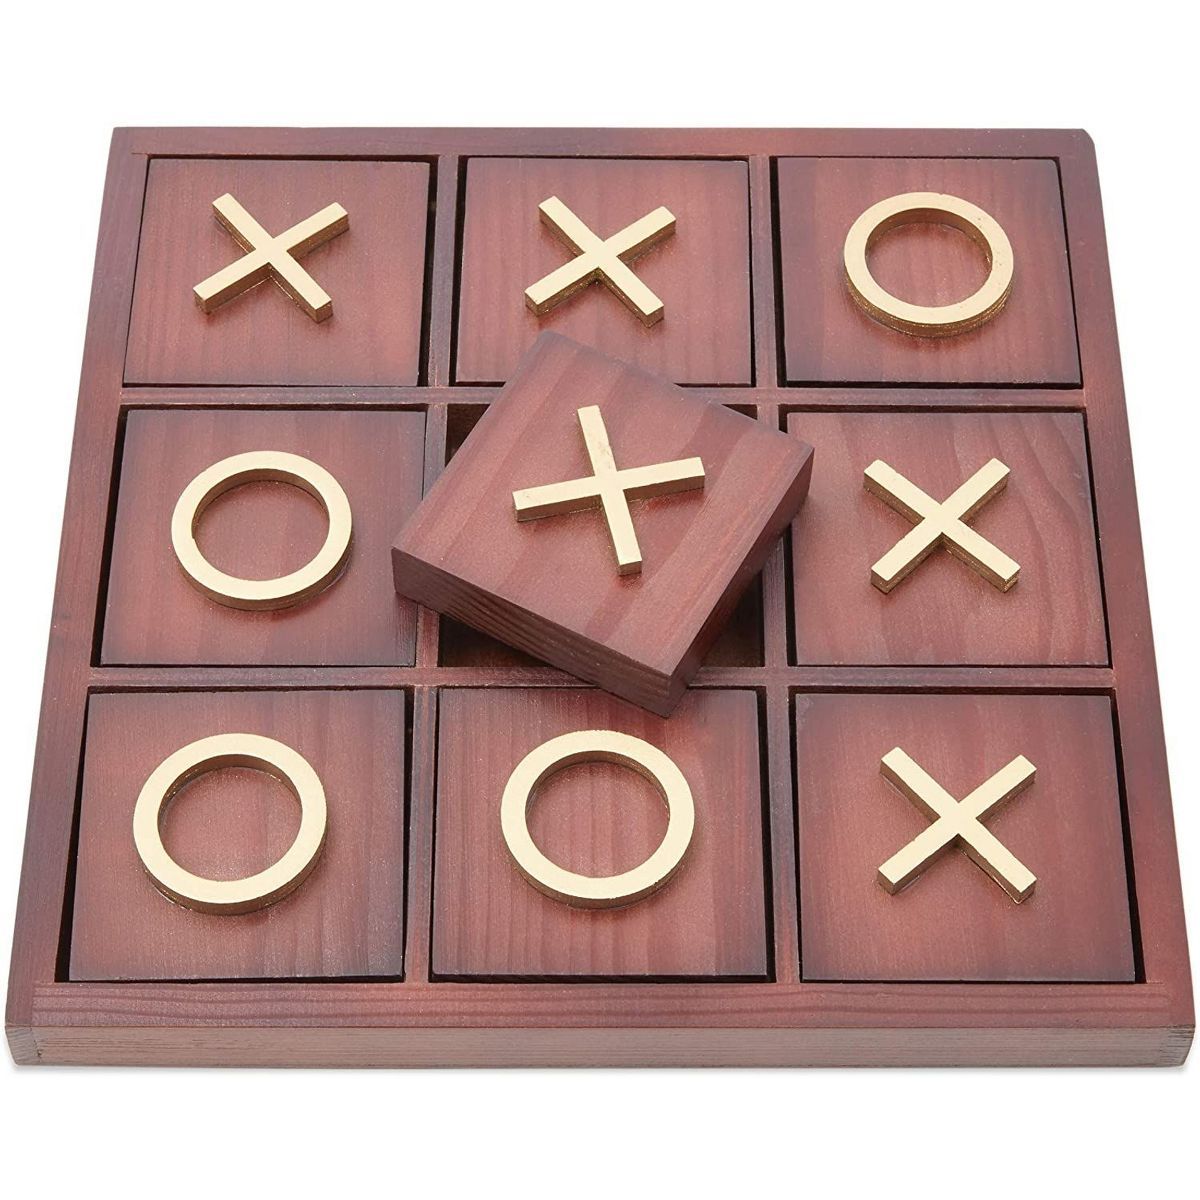 Juvale 10 Pieces Wooden Tic Tac Toe Board Game for Kids and Adults, 9.5 x 9.5 in | Target